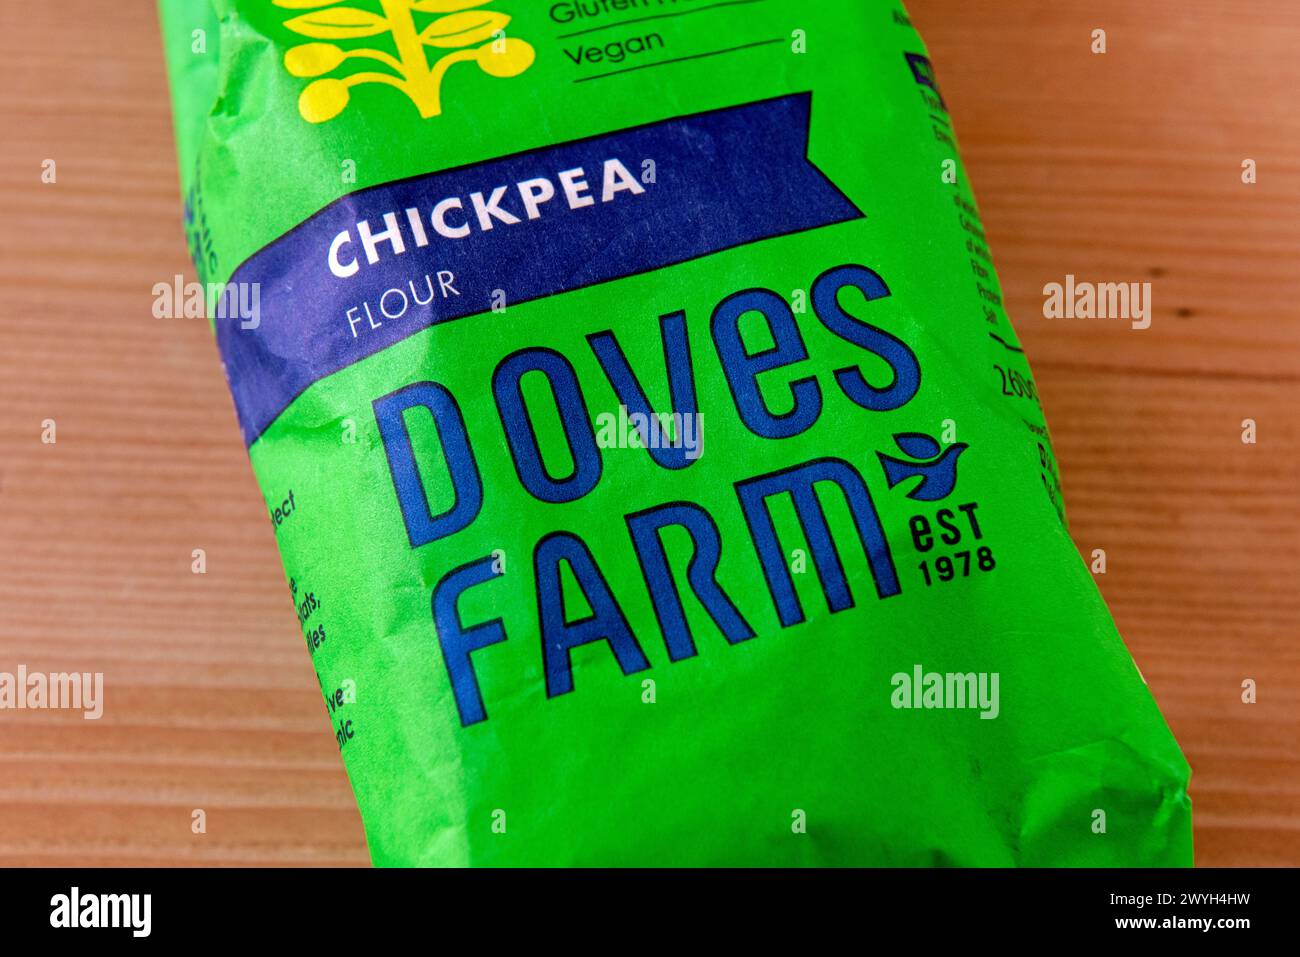 Packet of Doves Farm organic Chickpea Flour on table Stock Photo